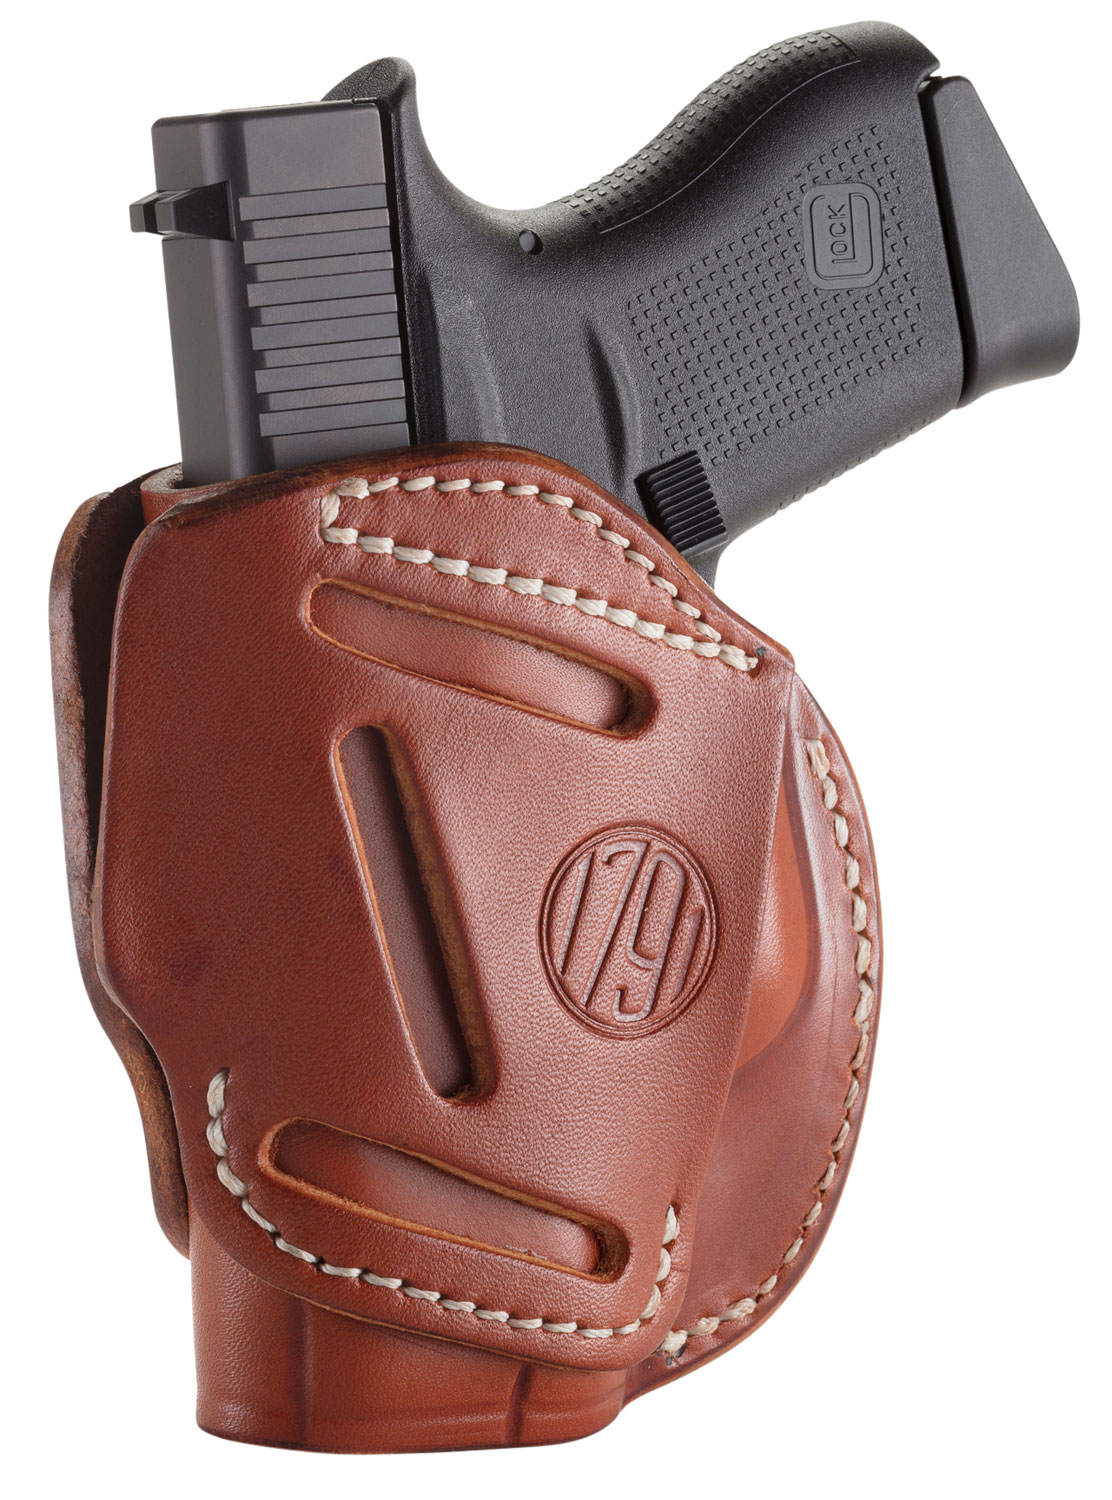 1791 Gunleather 3WH2CBRA 3-Way  IWB/OWB Size 02 Classic Brown Leather Belt Loop Compatible w/ Ruger LCP Compatible w/ Glock 42 Compatible w/ S&W Bodyguard Ambidextrous Hand